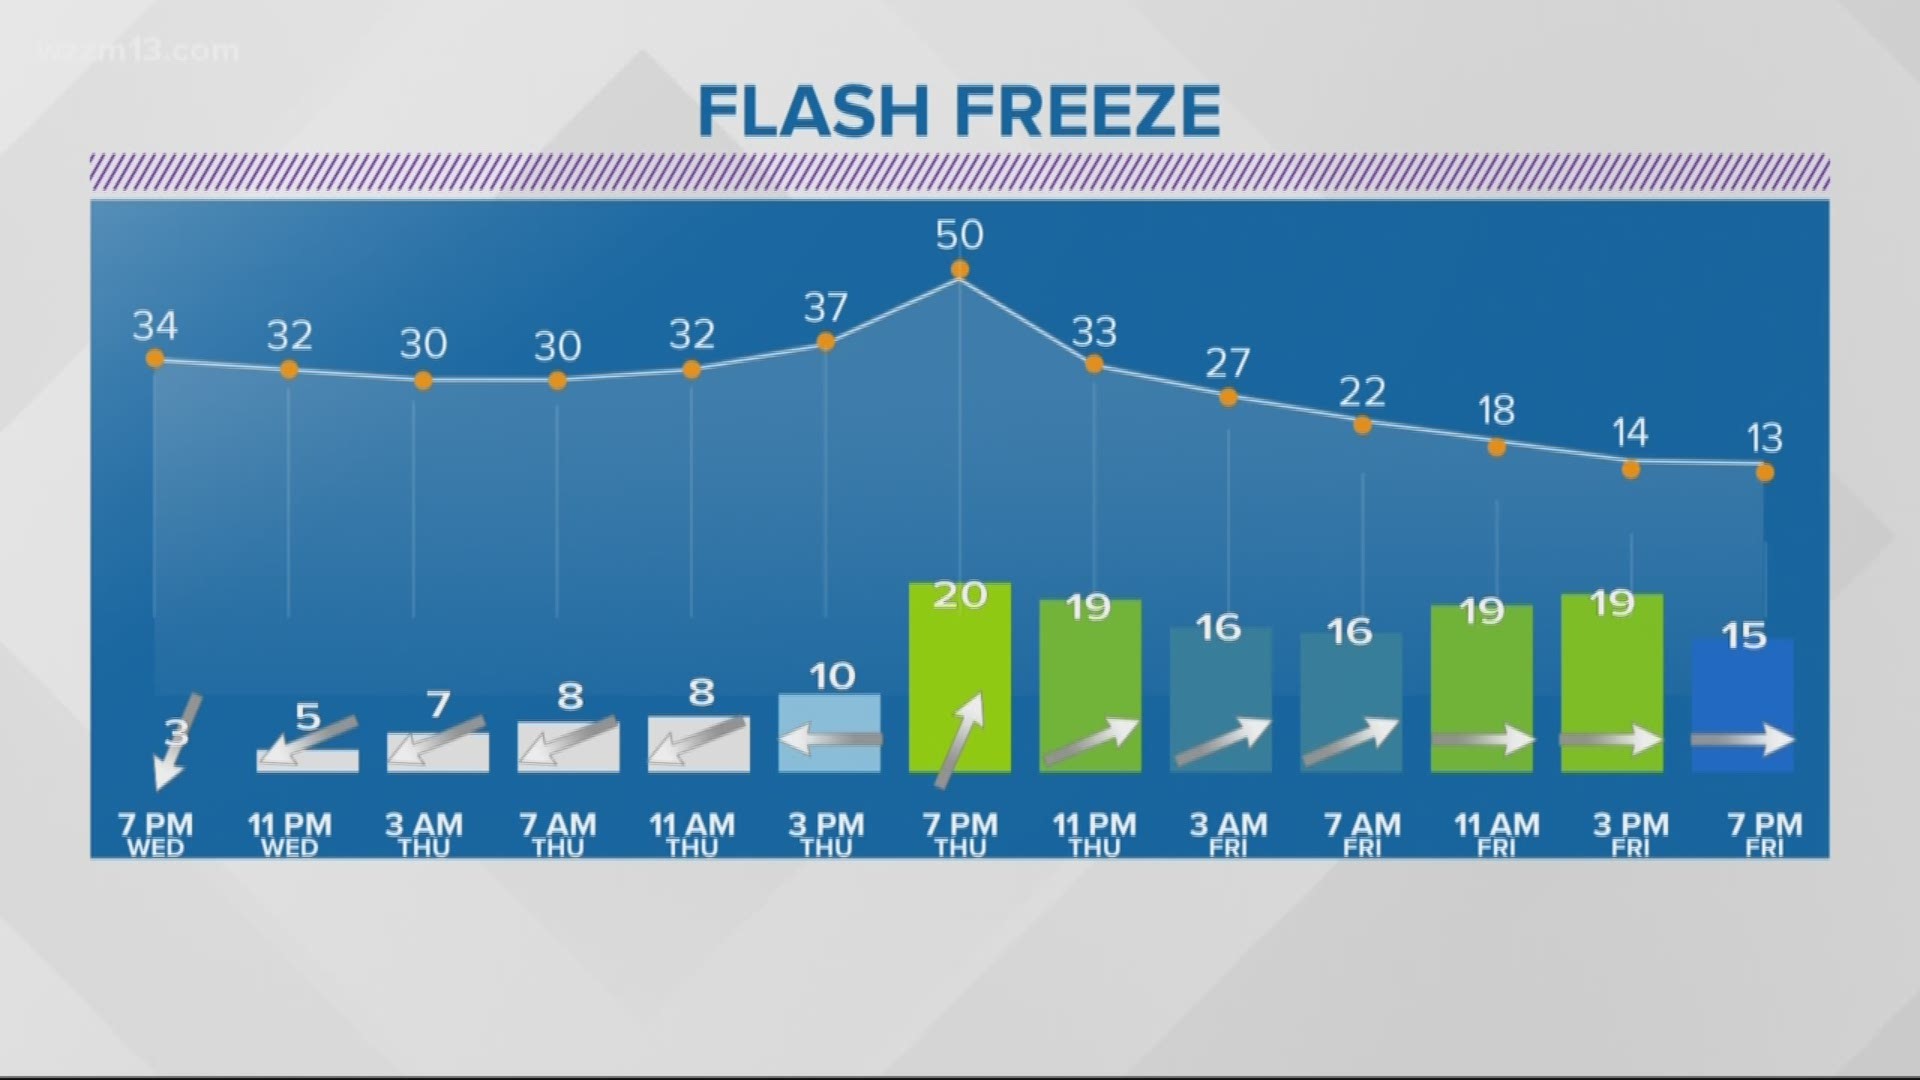 Friday flash freeze on the way